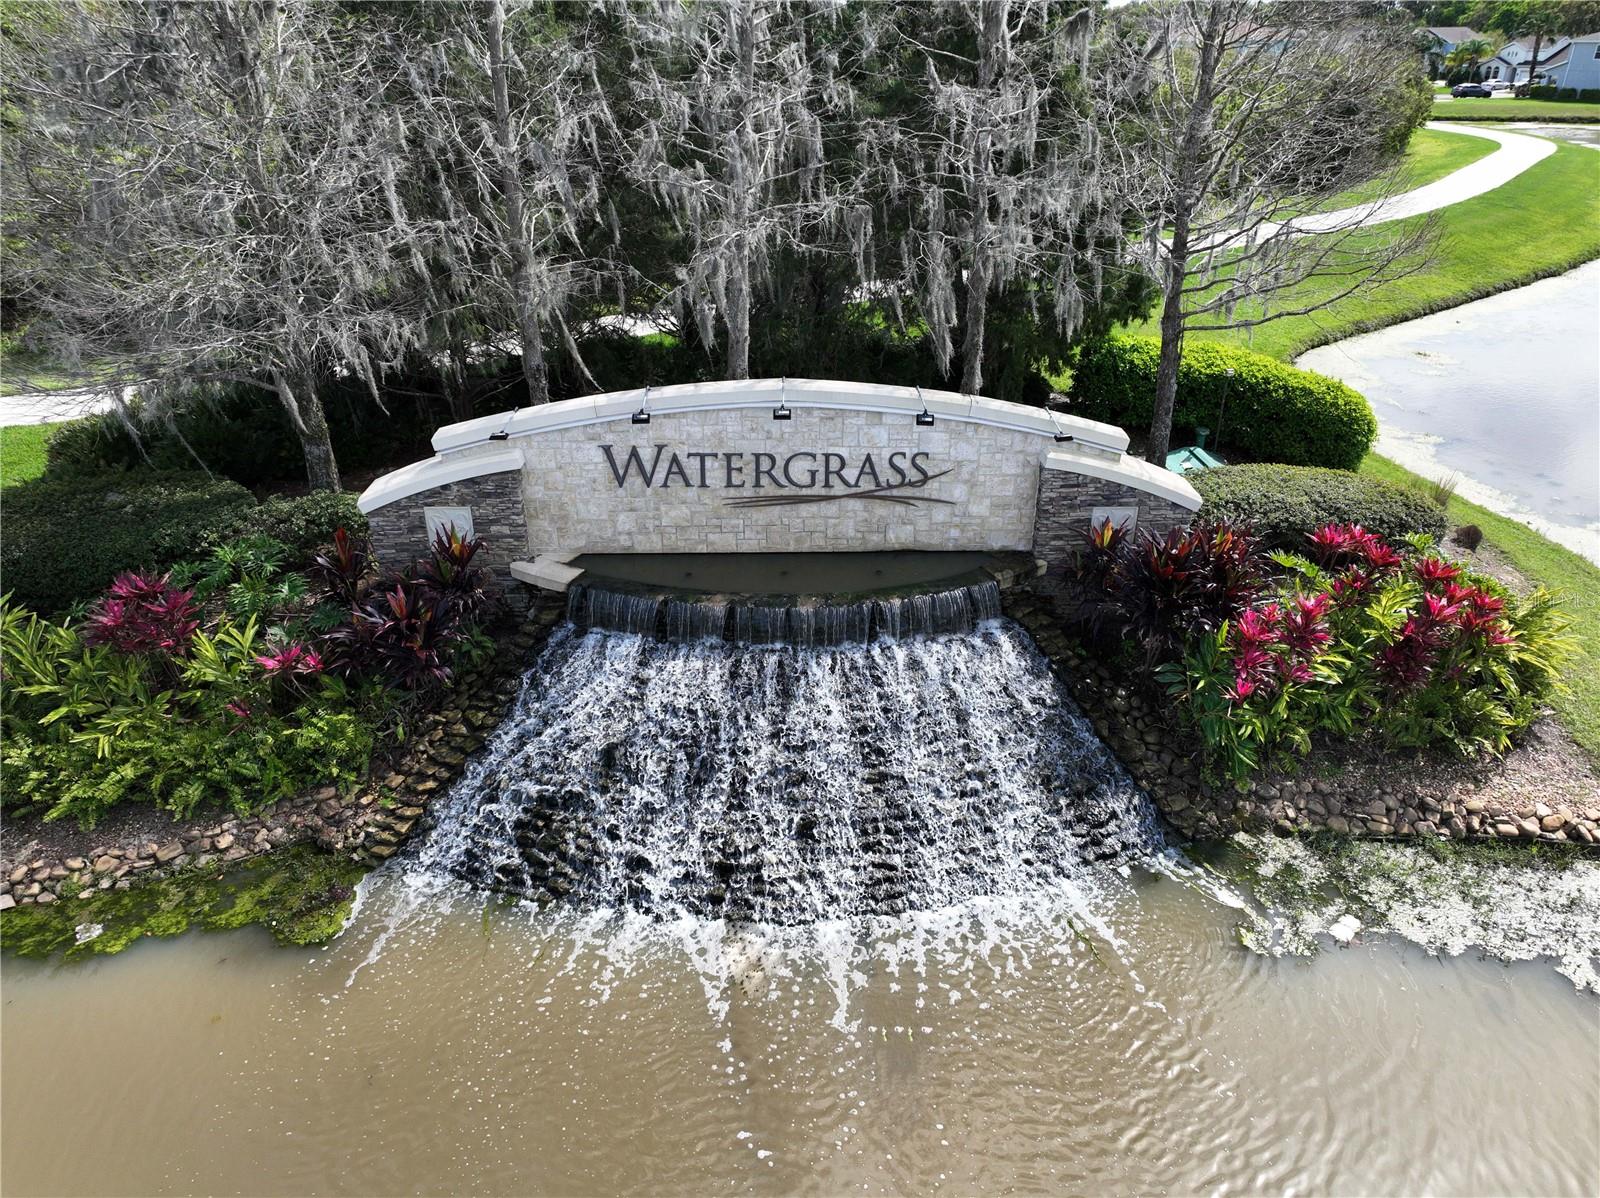 Watergrass main entrance sign